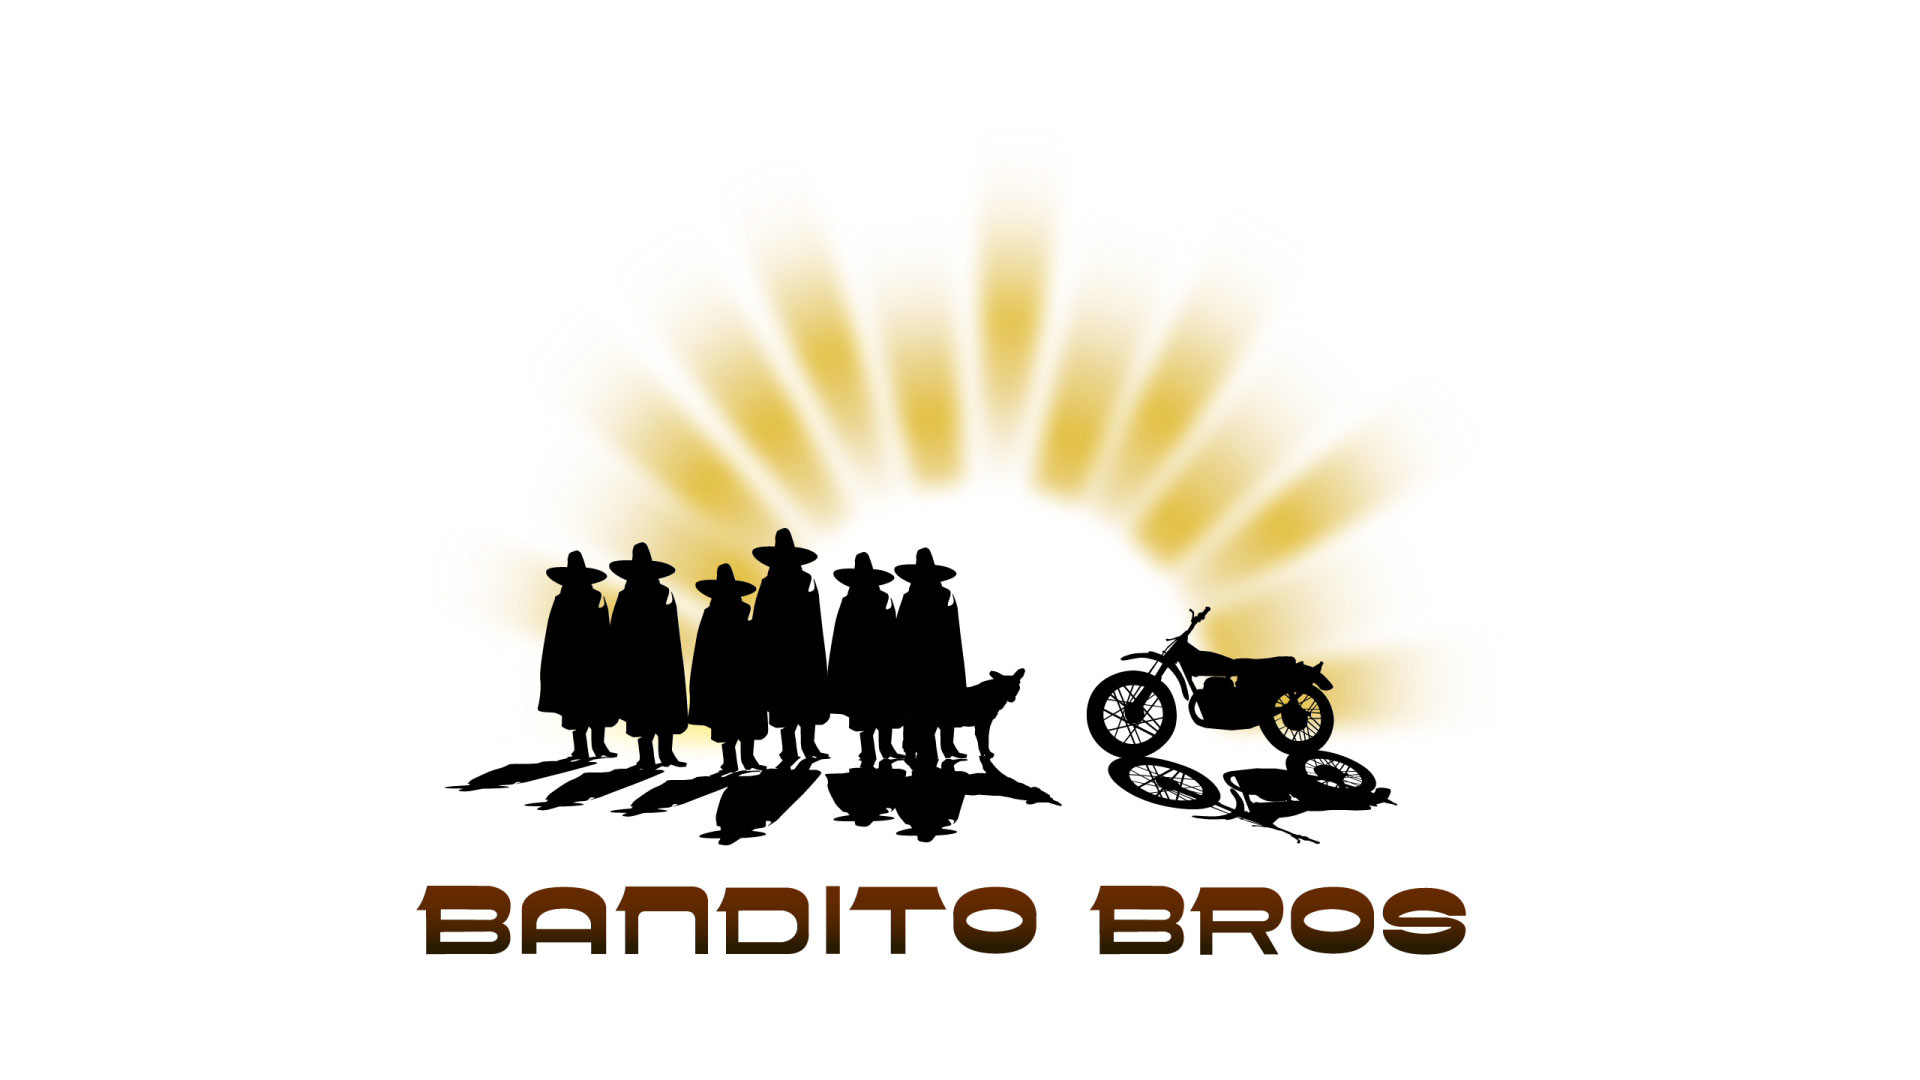 1920x1080 After Navy SEAL Pic 'Act Of Valor,' Bandito Brothers Rev 'High Speed'  Racing Pic